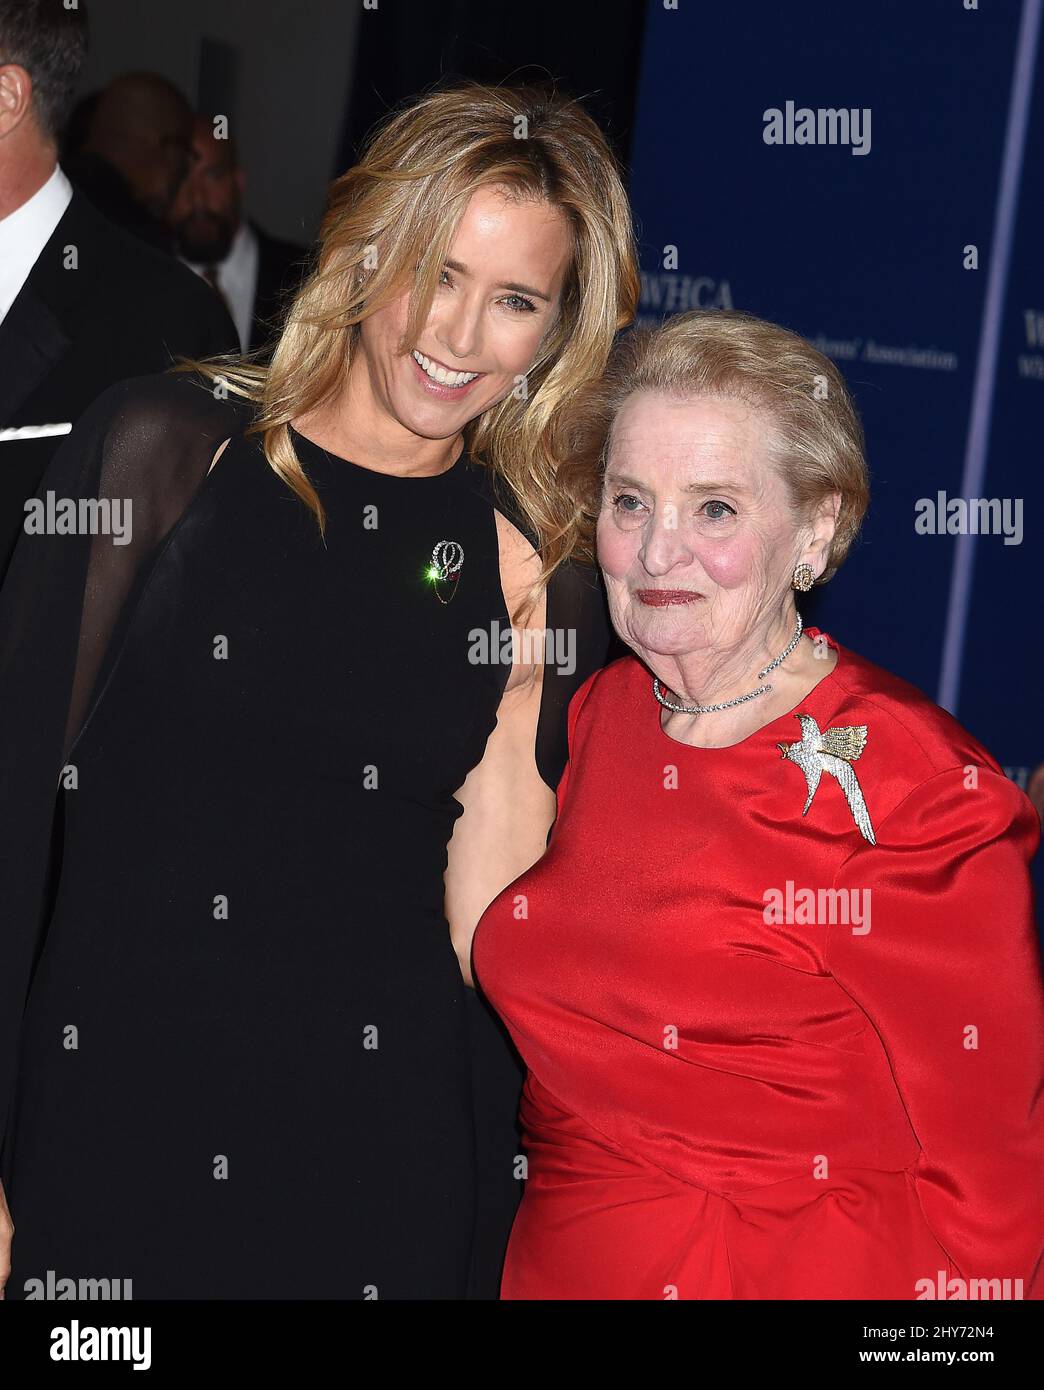 Tea Leoni & Madeline Albright attends the White House Correspondents Association Dinner 2015 held at the Hilton Hotel. Stock Photo